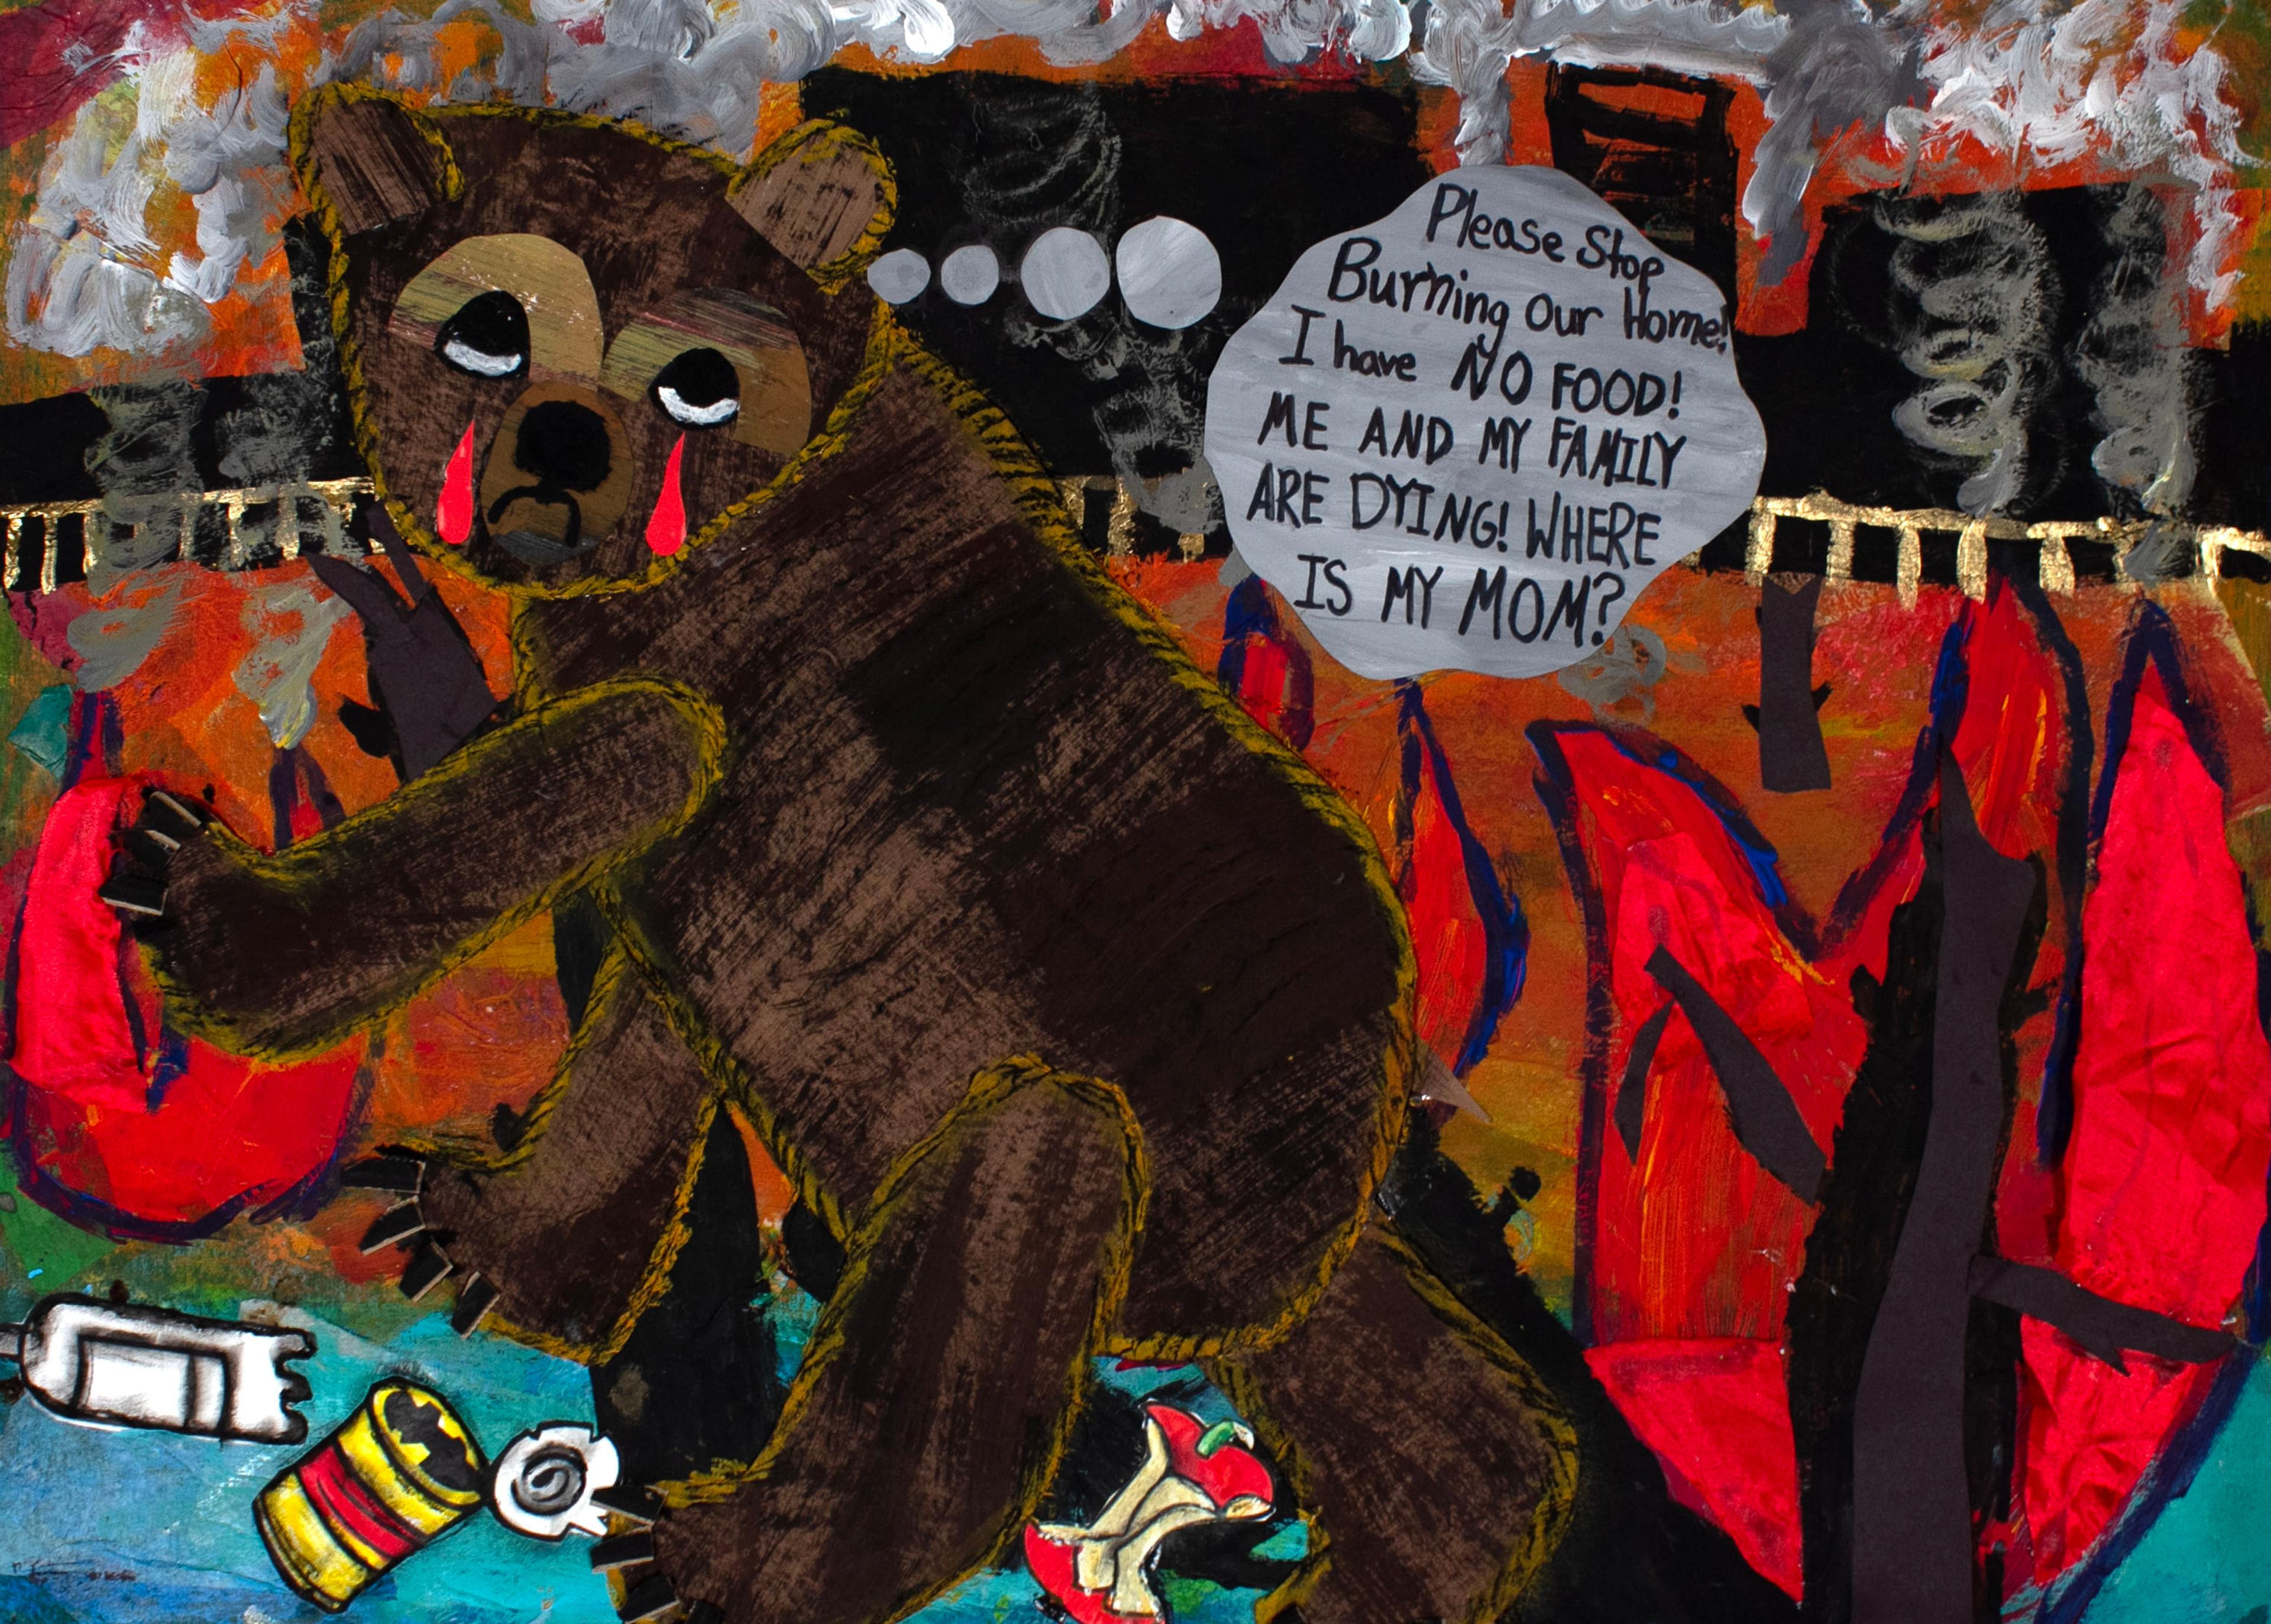 Mixed-media collage of a brown bear cub climbing toward the left and facing the viewer. The cub has blood red tears dripping from its eyes, and a sad expression on its face. Litter is shown below the bear's paws, including a plastic bottle, a metal can with a torn open lid, and the remains of an eaten apple. Behind the bear, a field of red forest fires extends to a light colored fence in the distance, behind which sits a long row of black buildings that spew gray smoke into a red sky. A thought balloon extends from the bear's head which reads, "Please stop burning our home! I have NO FOOD! ME AND MY FAMILY ARE DYING! WHERE IS MY MOM?"